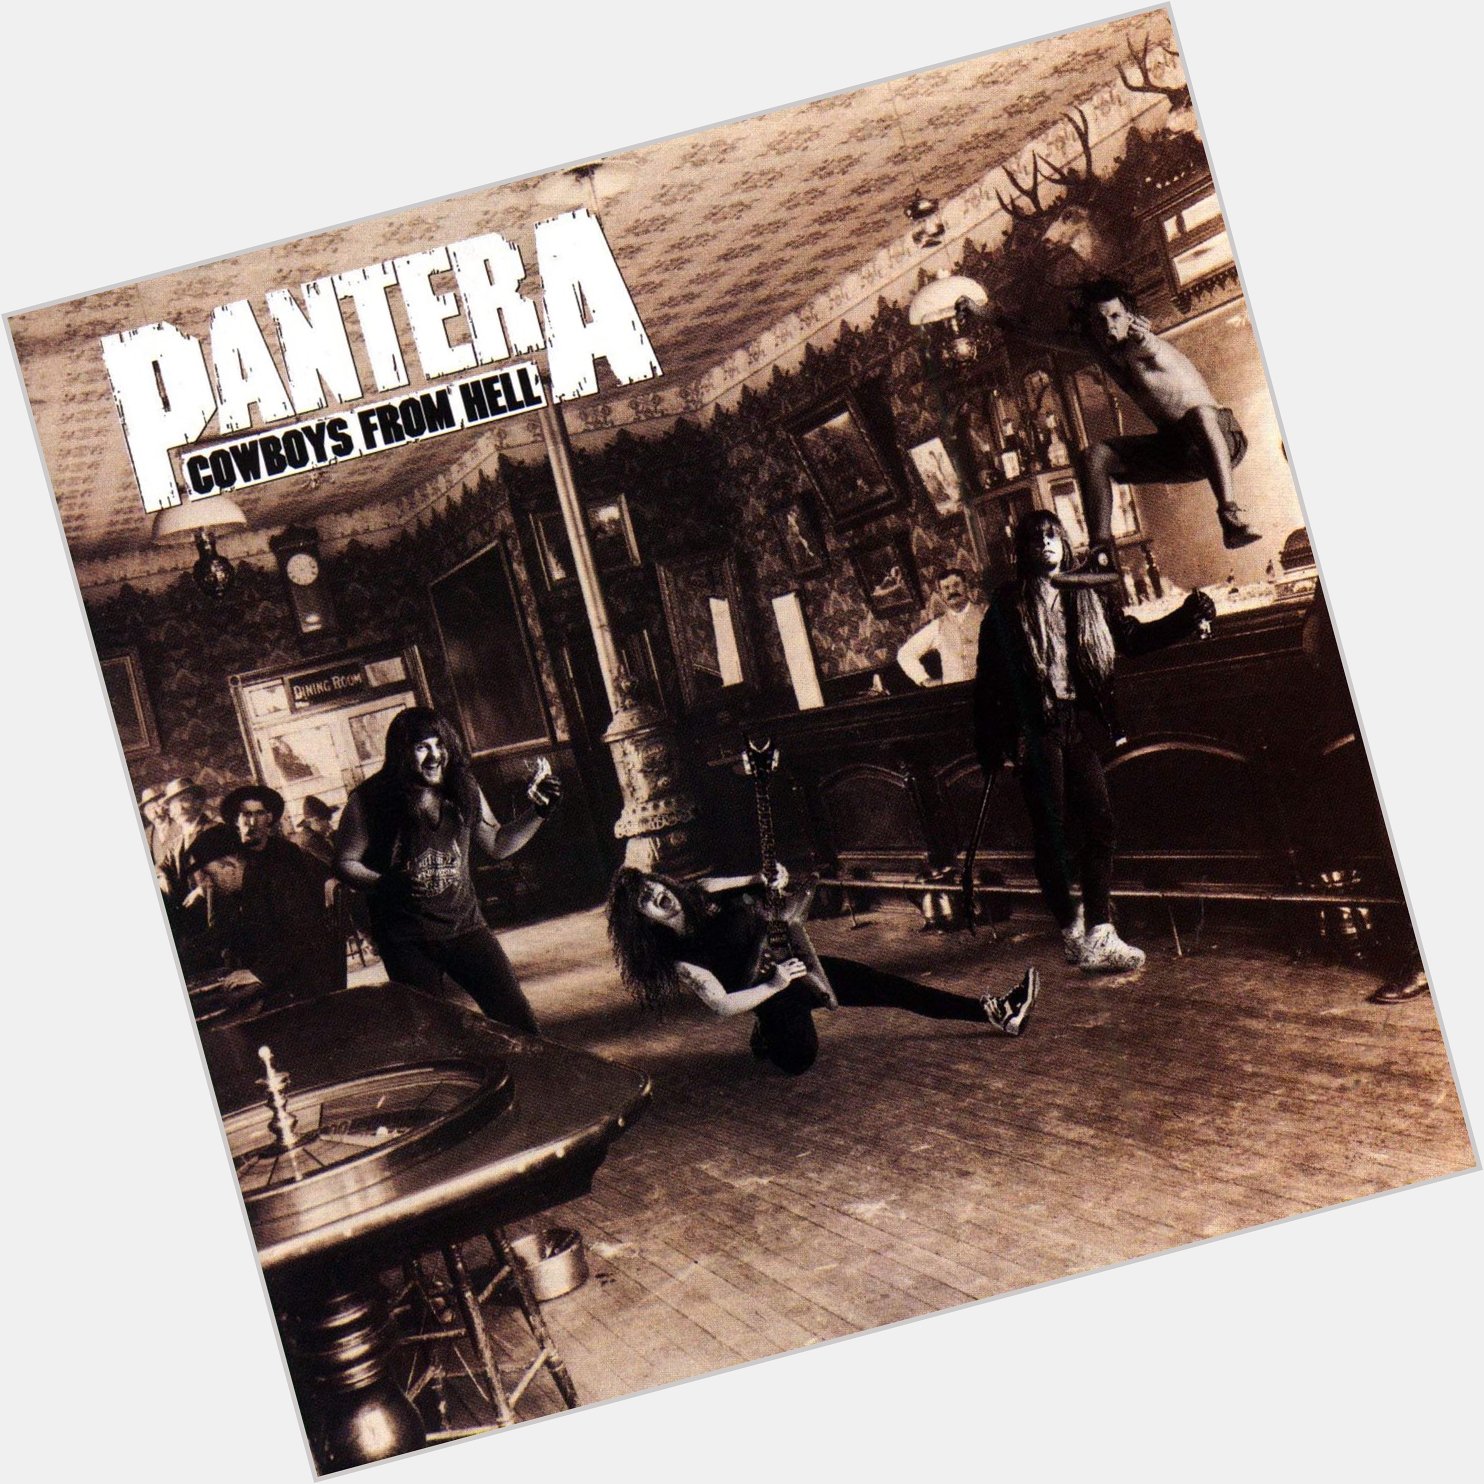  Cowboys From Hell
from Cowboys From Hell
by Pantera

Happy Birthday, Phil Anselmo 